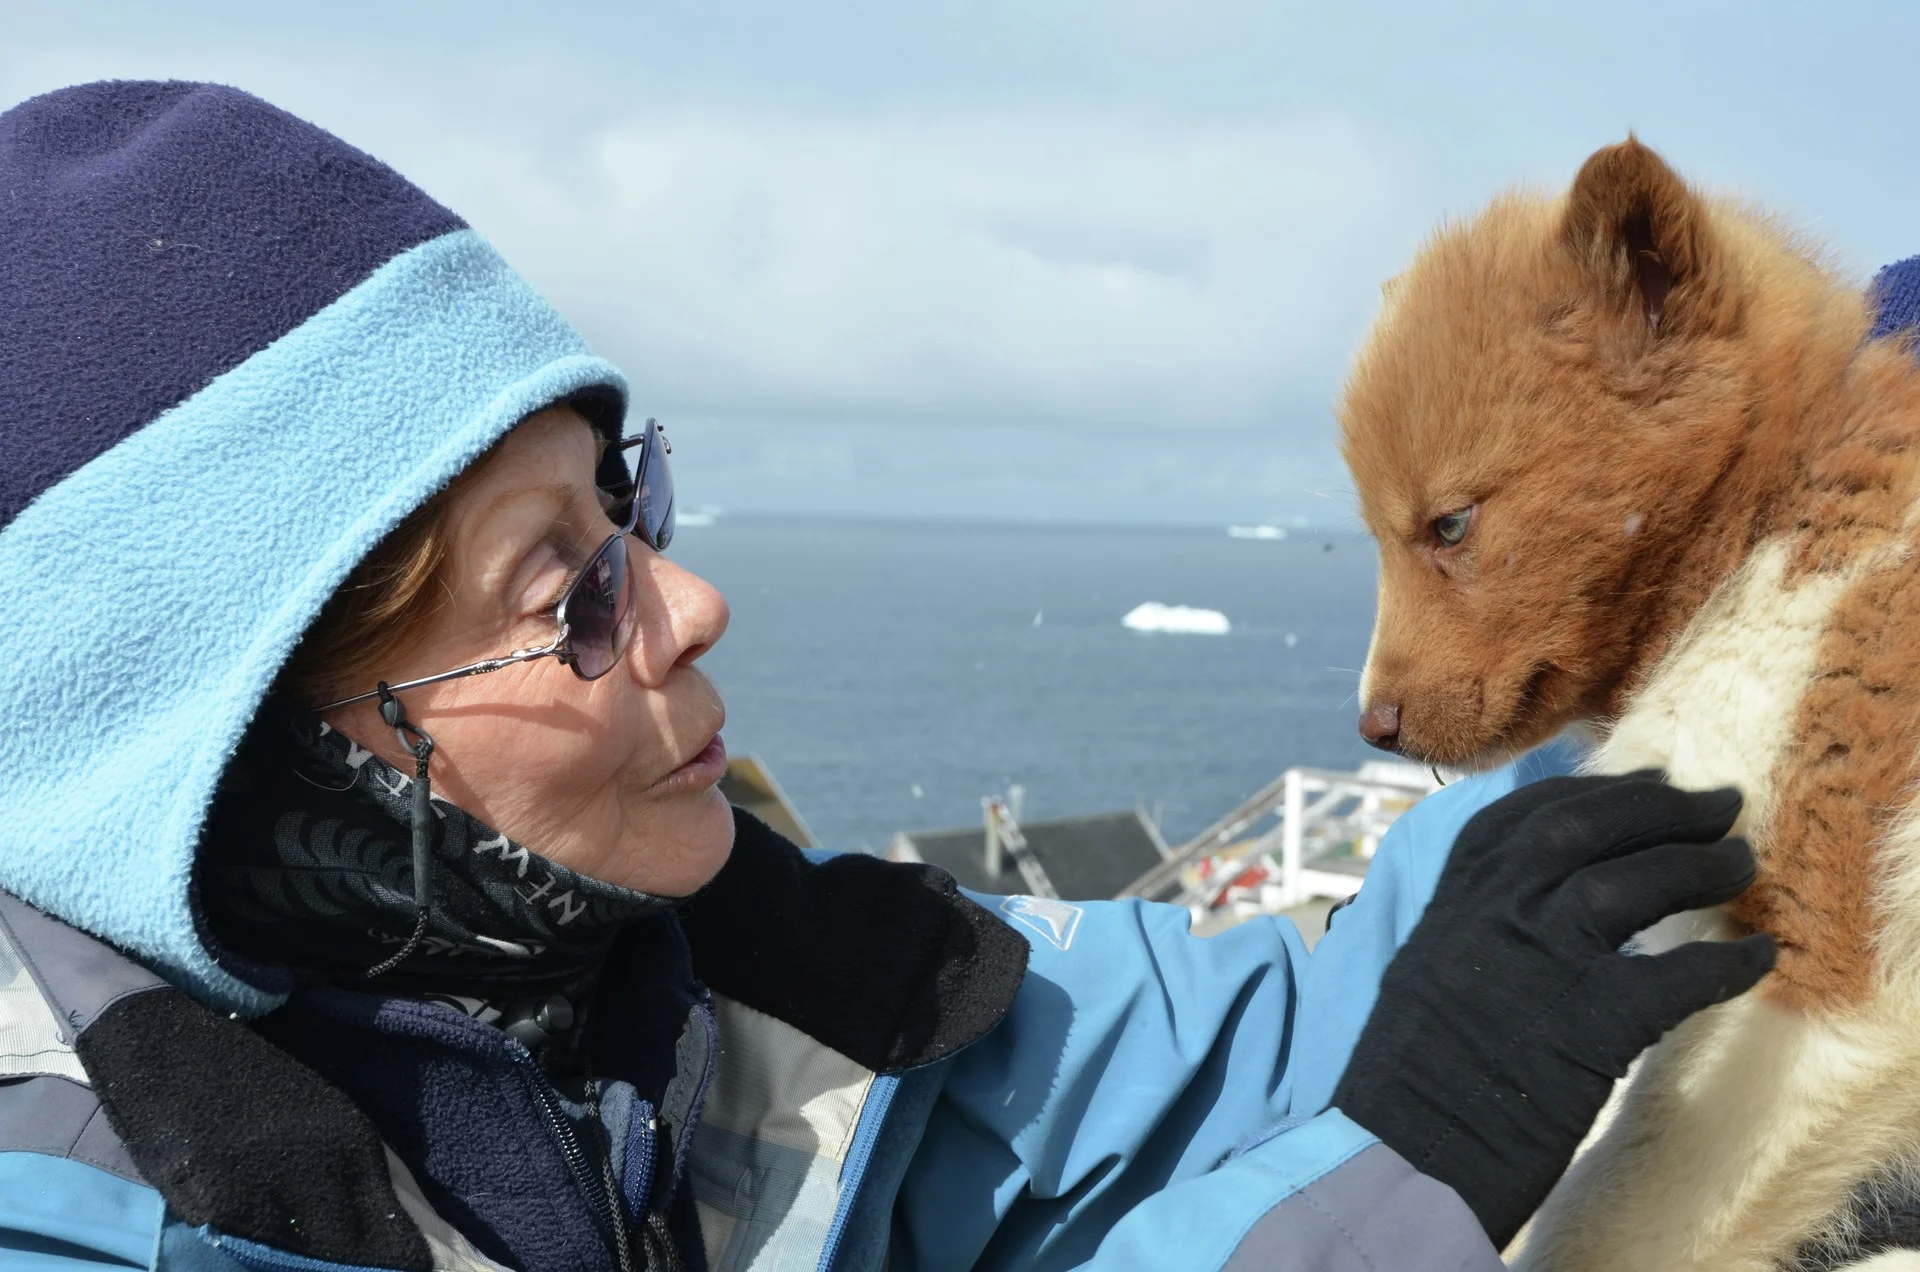 Meeting dogs in Greenland